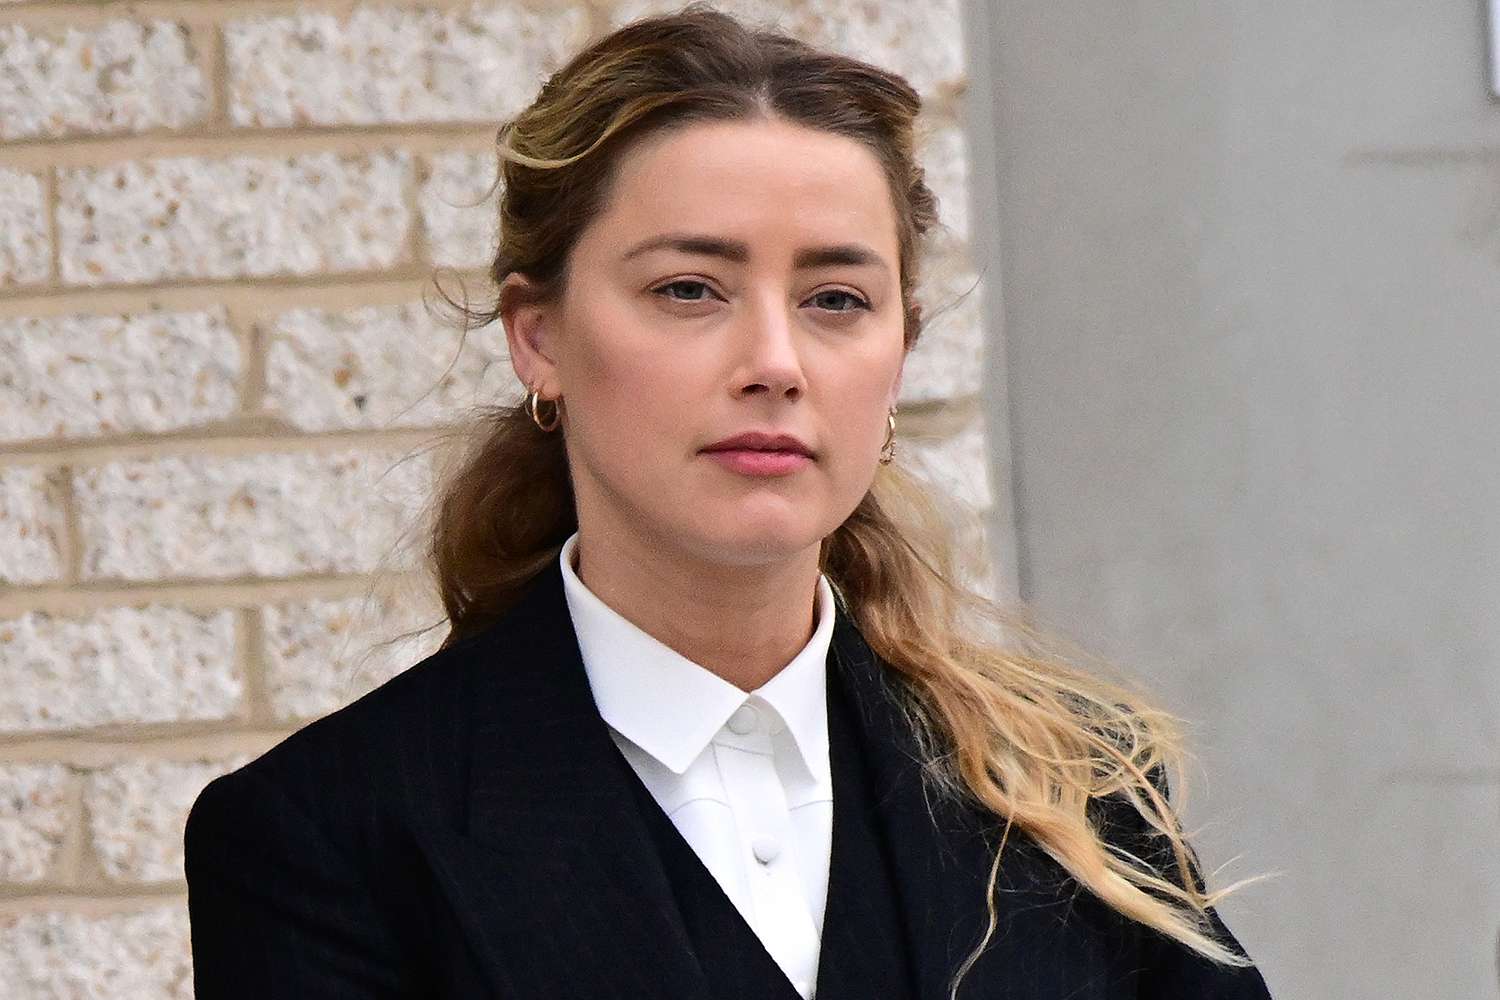 Amber Heard departs following the recess for the day outside court during the Johnny Depp and Amber Heard civil trial at Fairfax County Circuit Court on April 21, 2022 in Fairfax, Virginia.